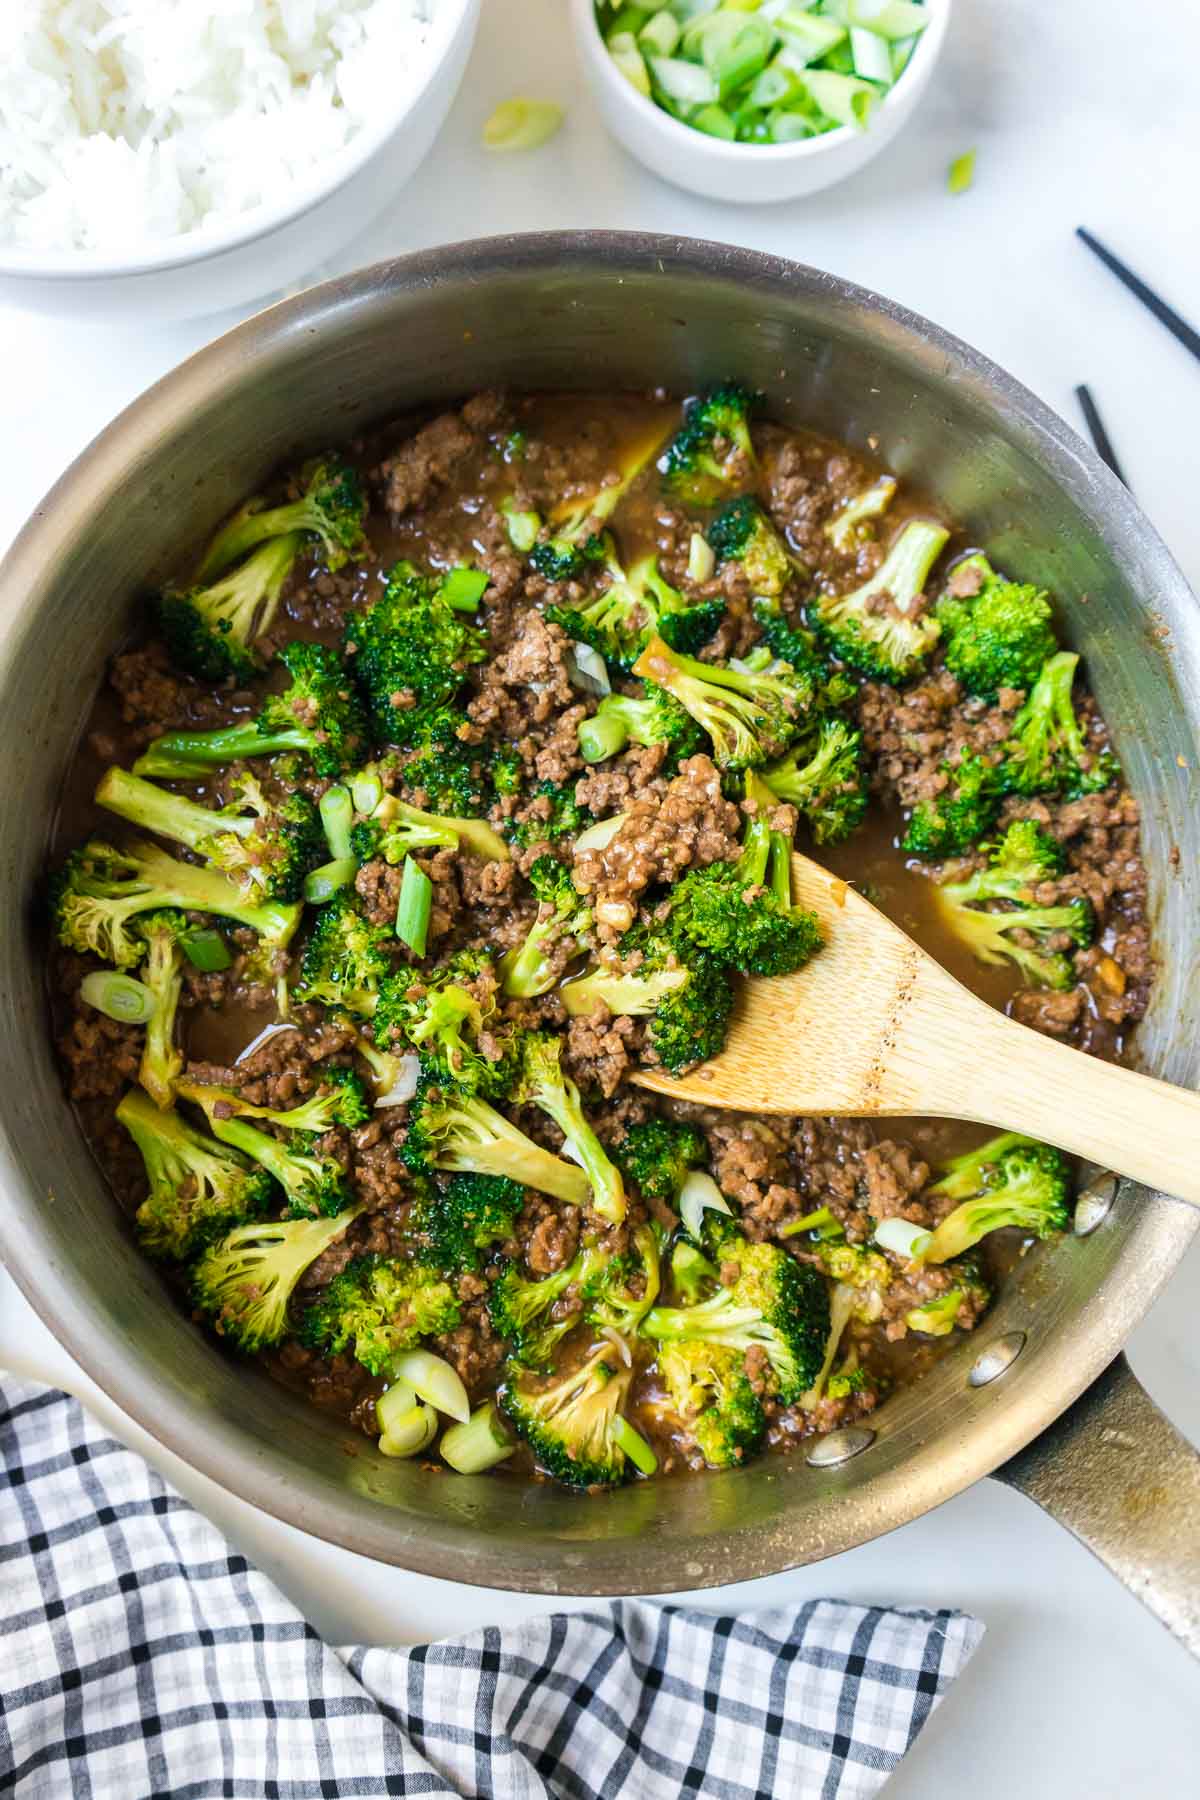 Healthy ground beef and broccoli in a pan with a wooden spoon.